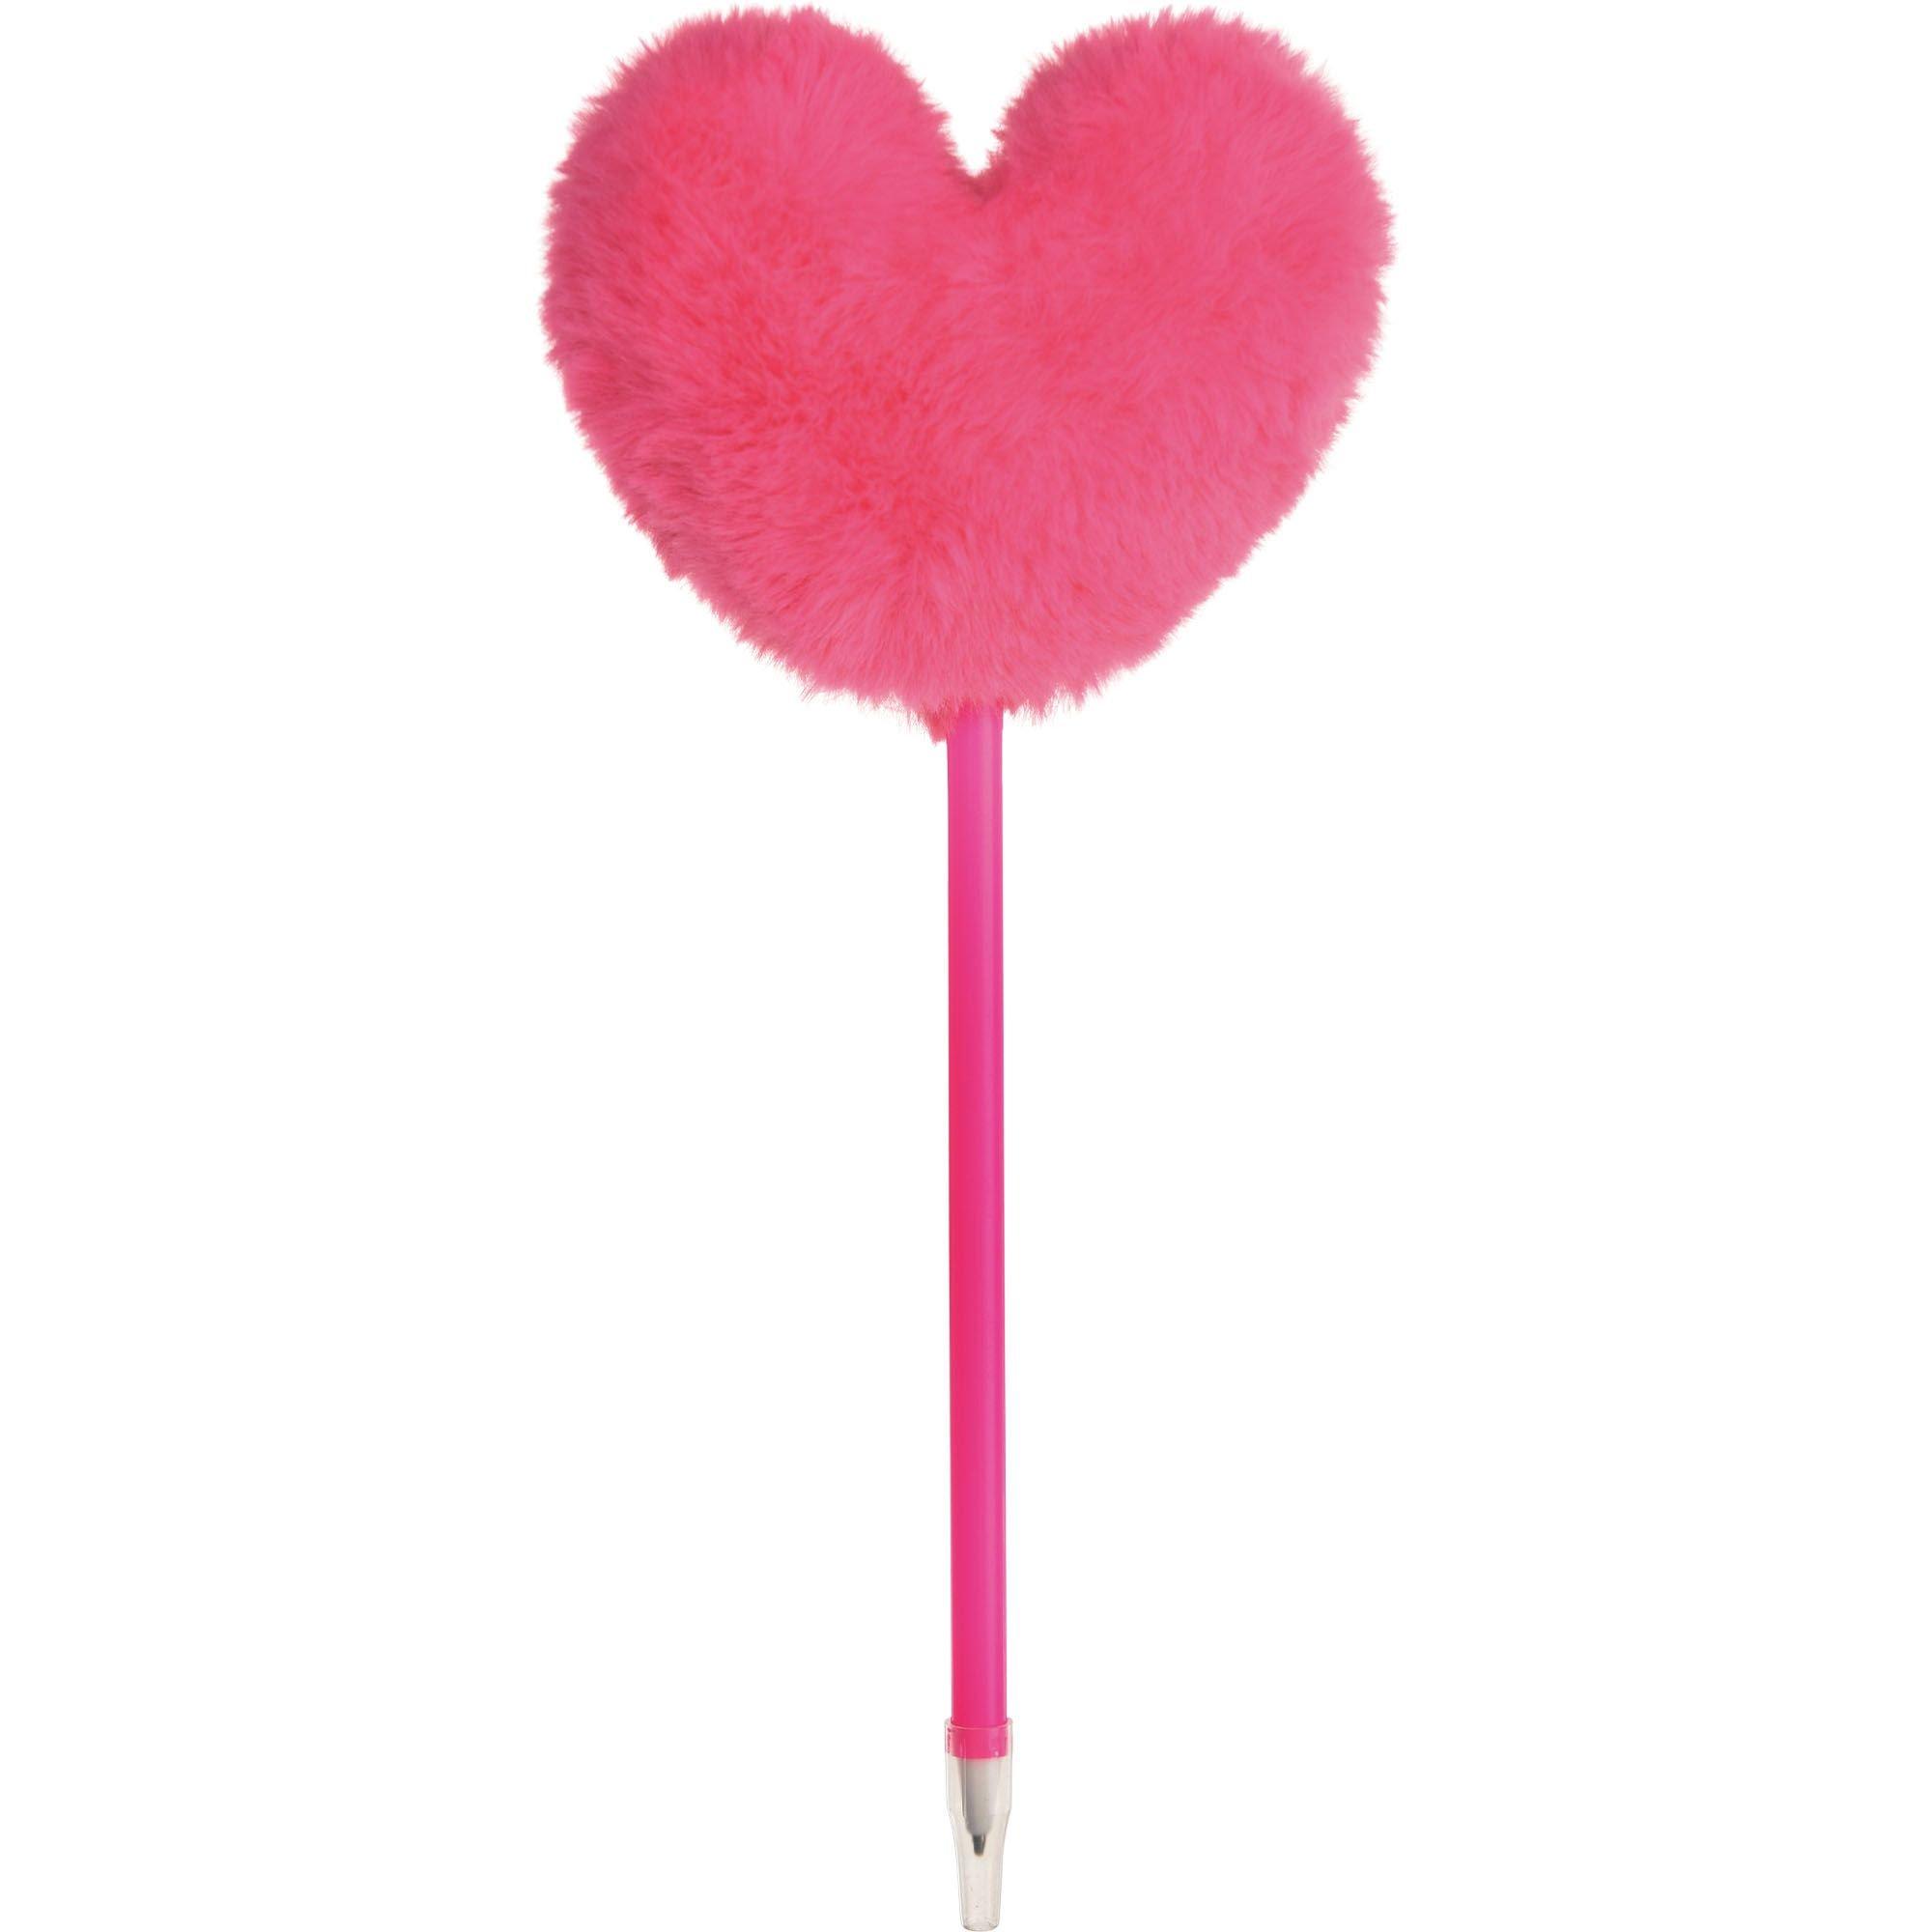 Lot of 6x Pink Heart BFF Pen - Silicone - Novelty Pens - New with